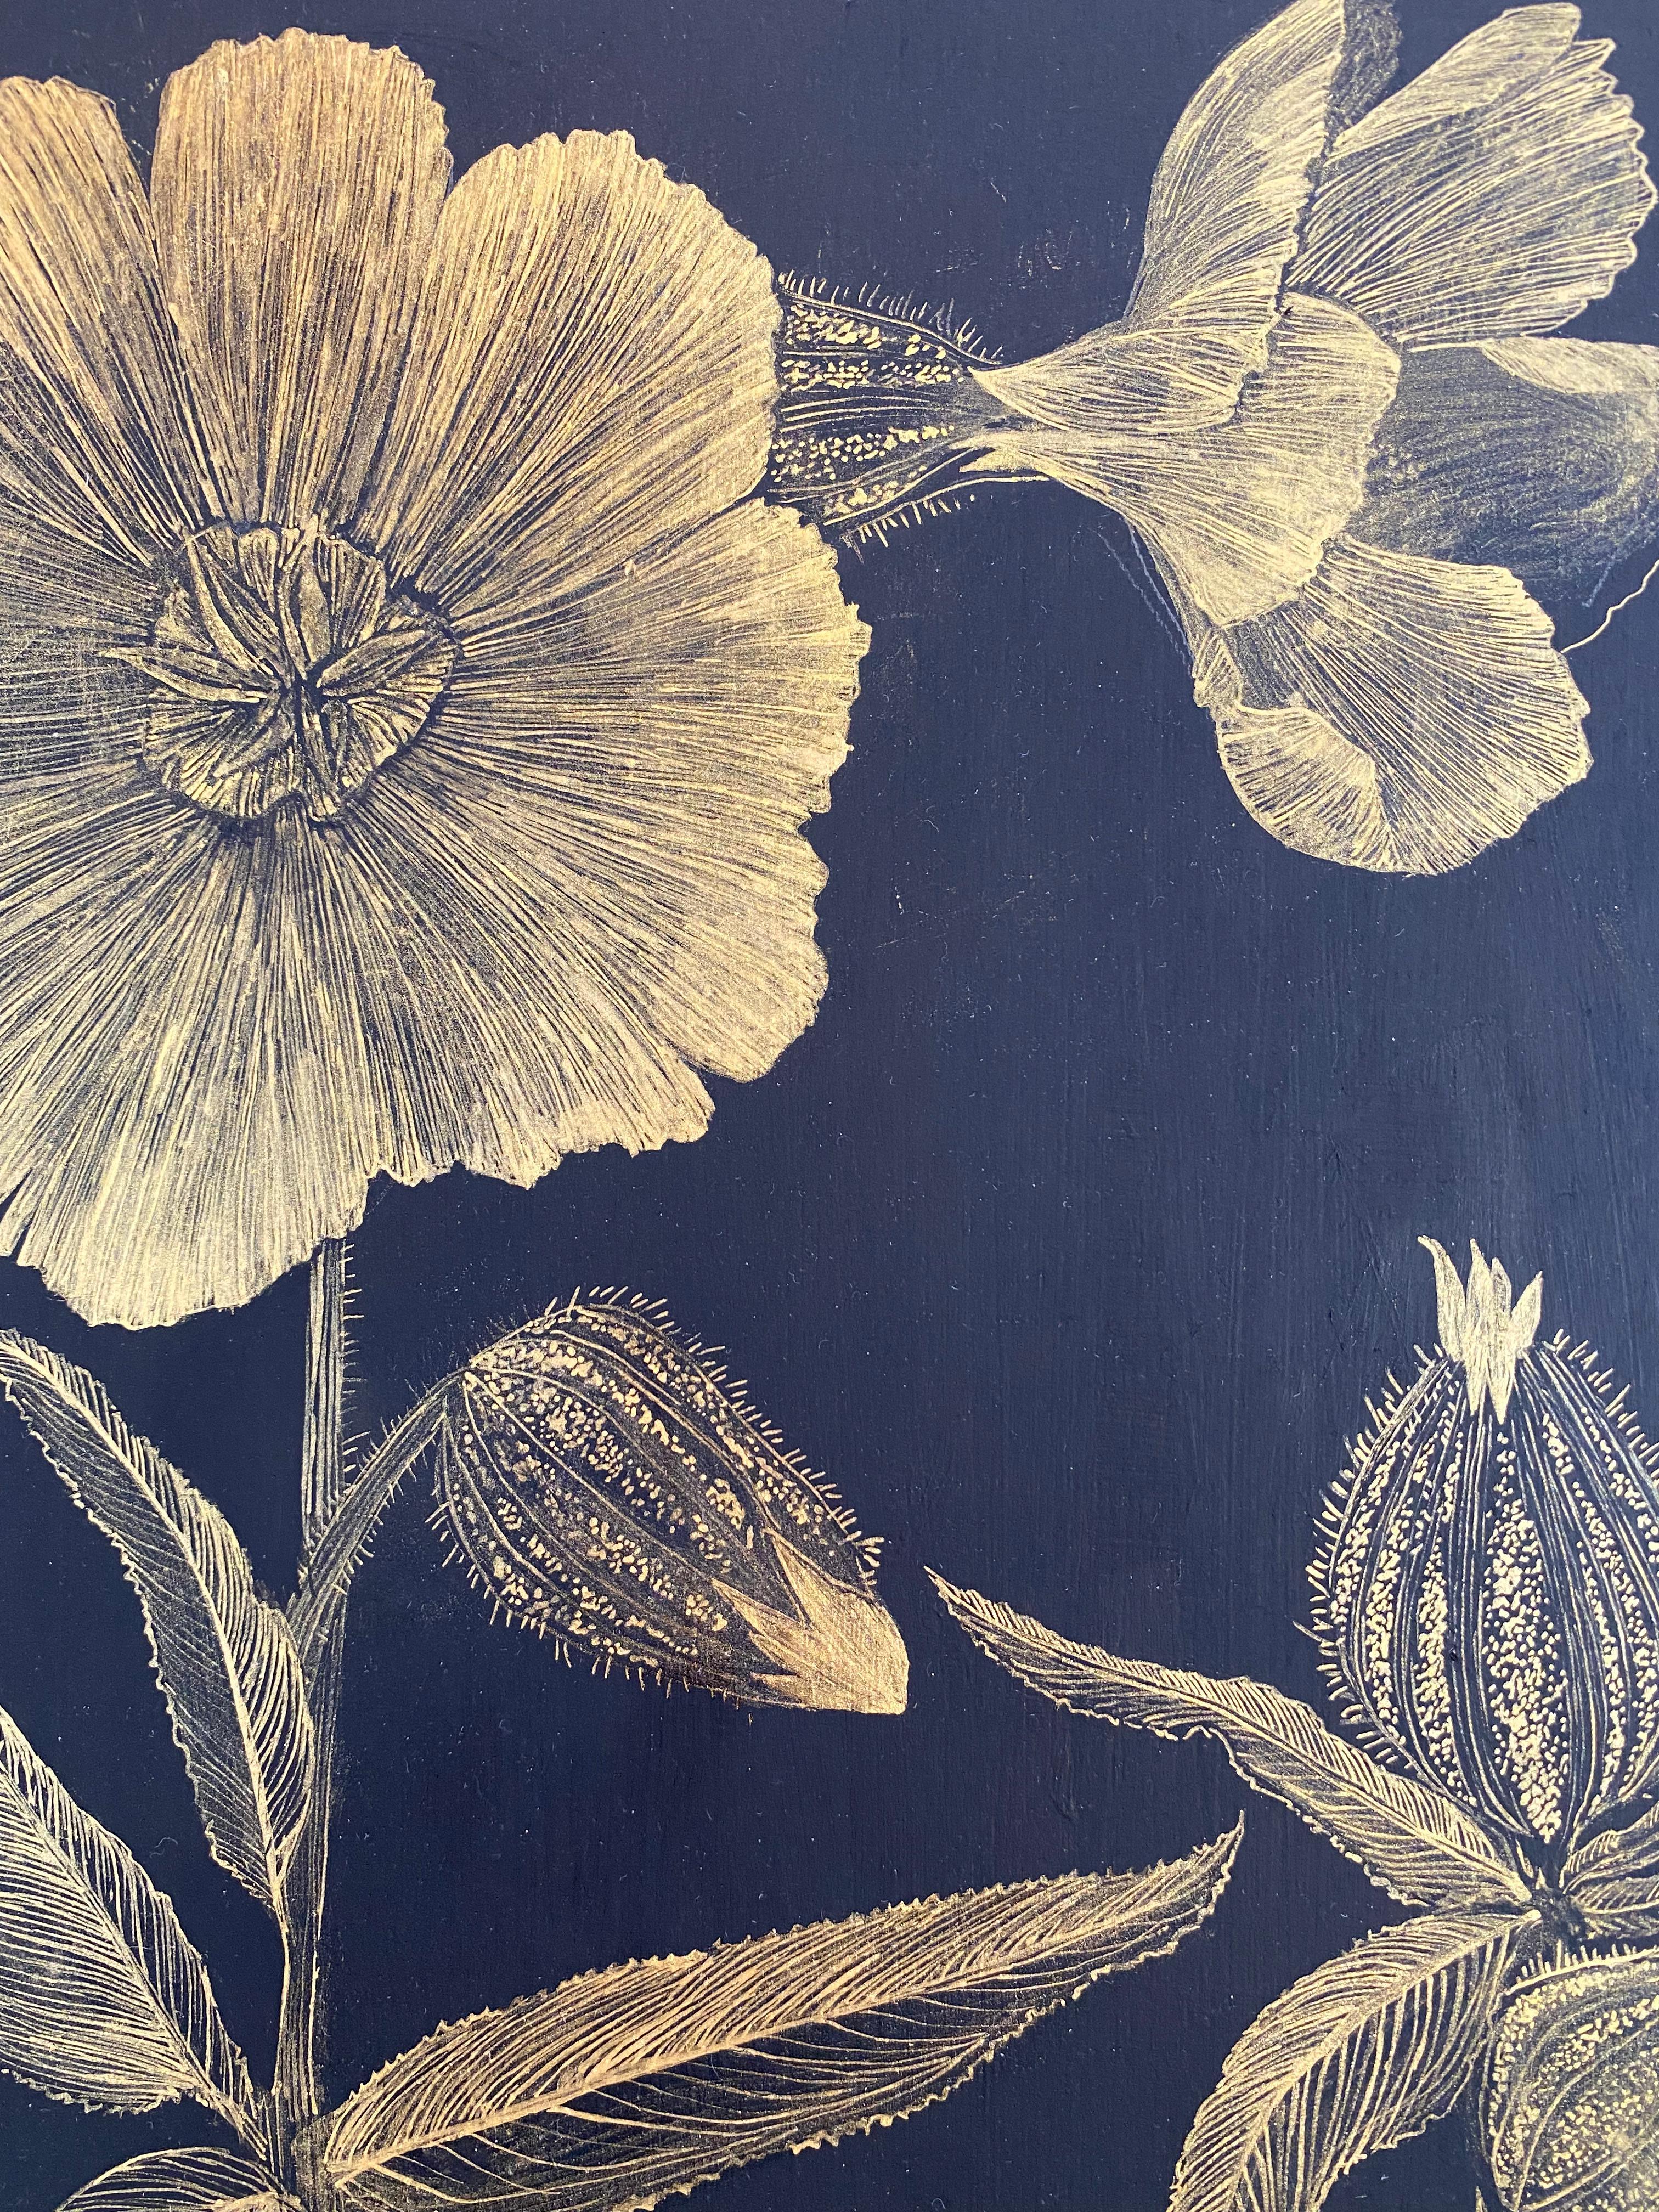 Marshmallow Two, Gold Flowers, Leaves Stem, Metallic Botanical Painting on Black For Sale 6